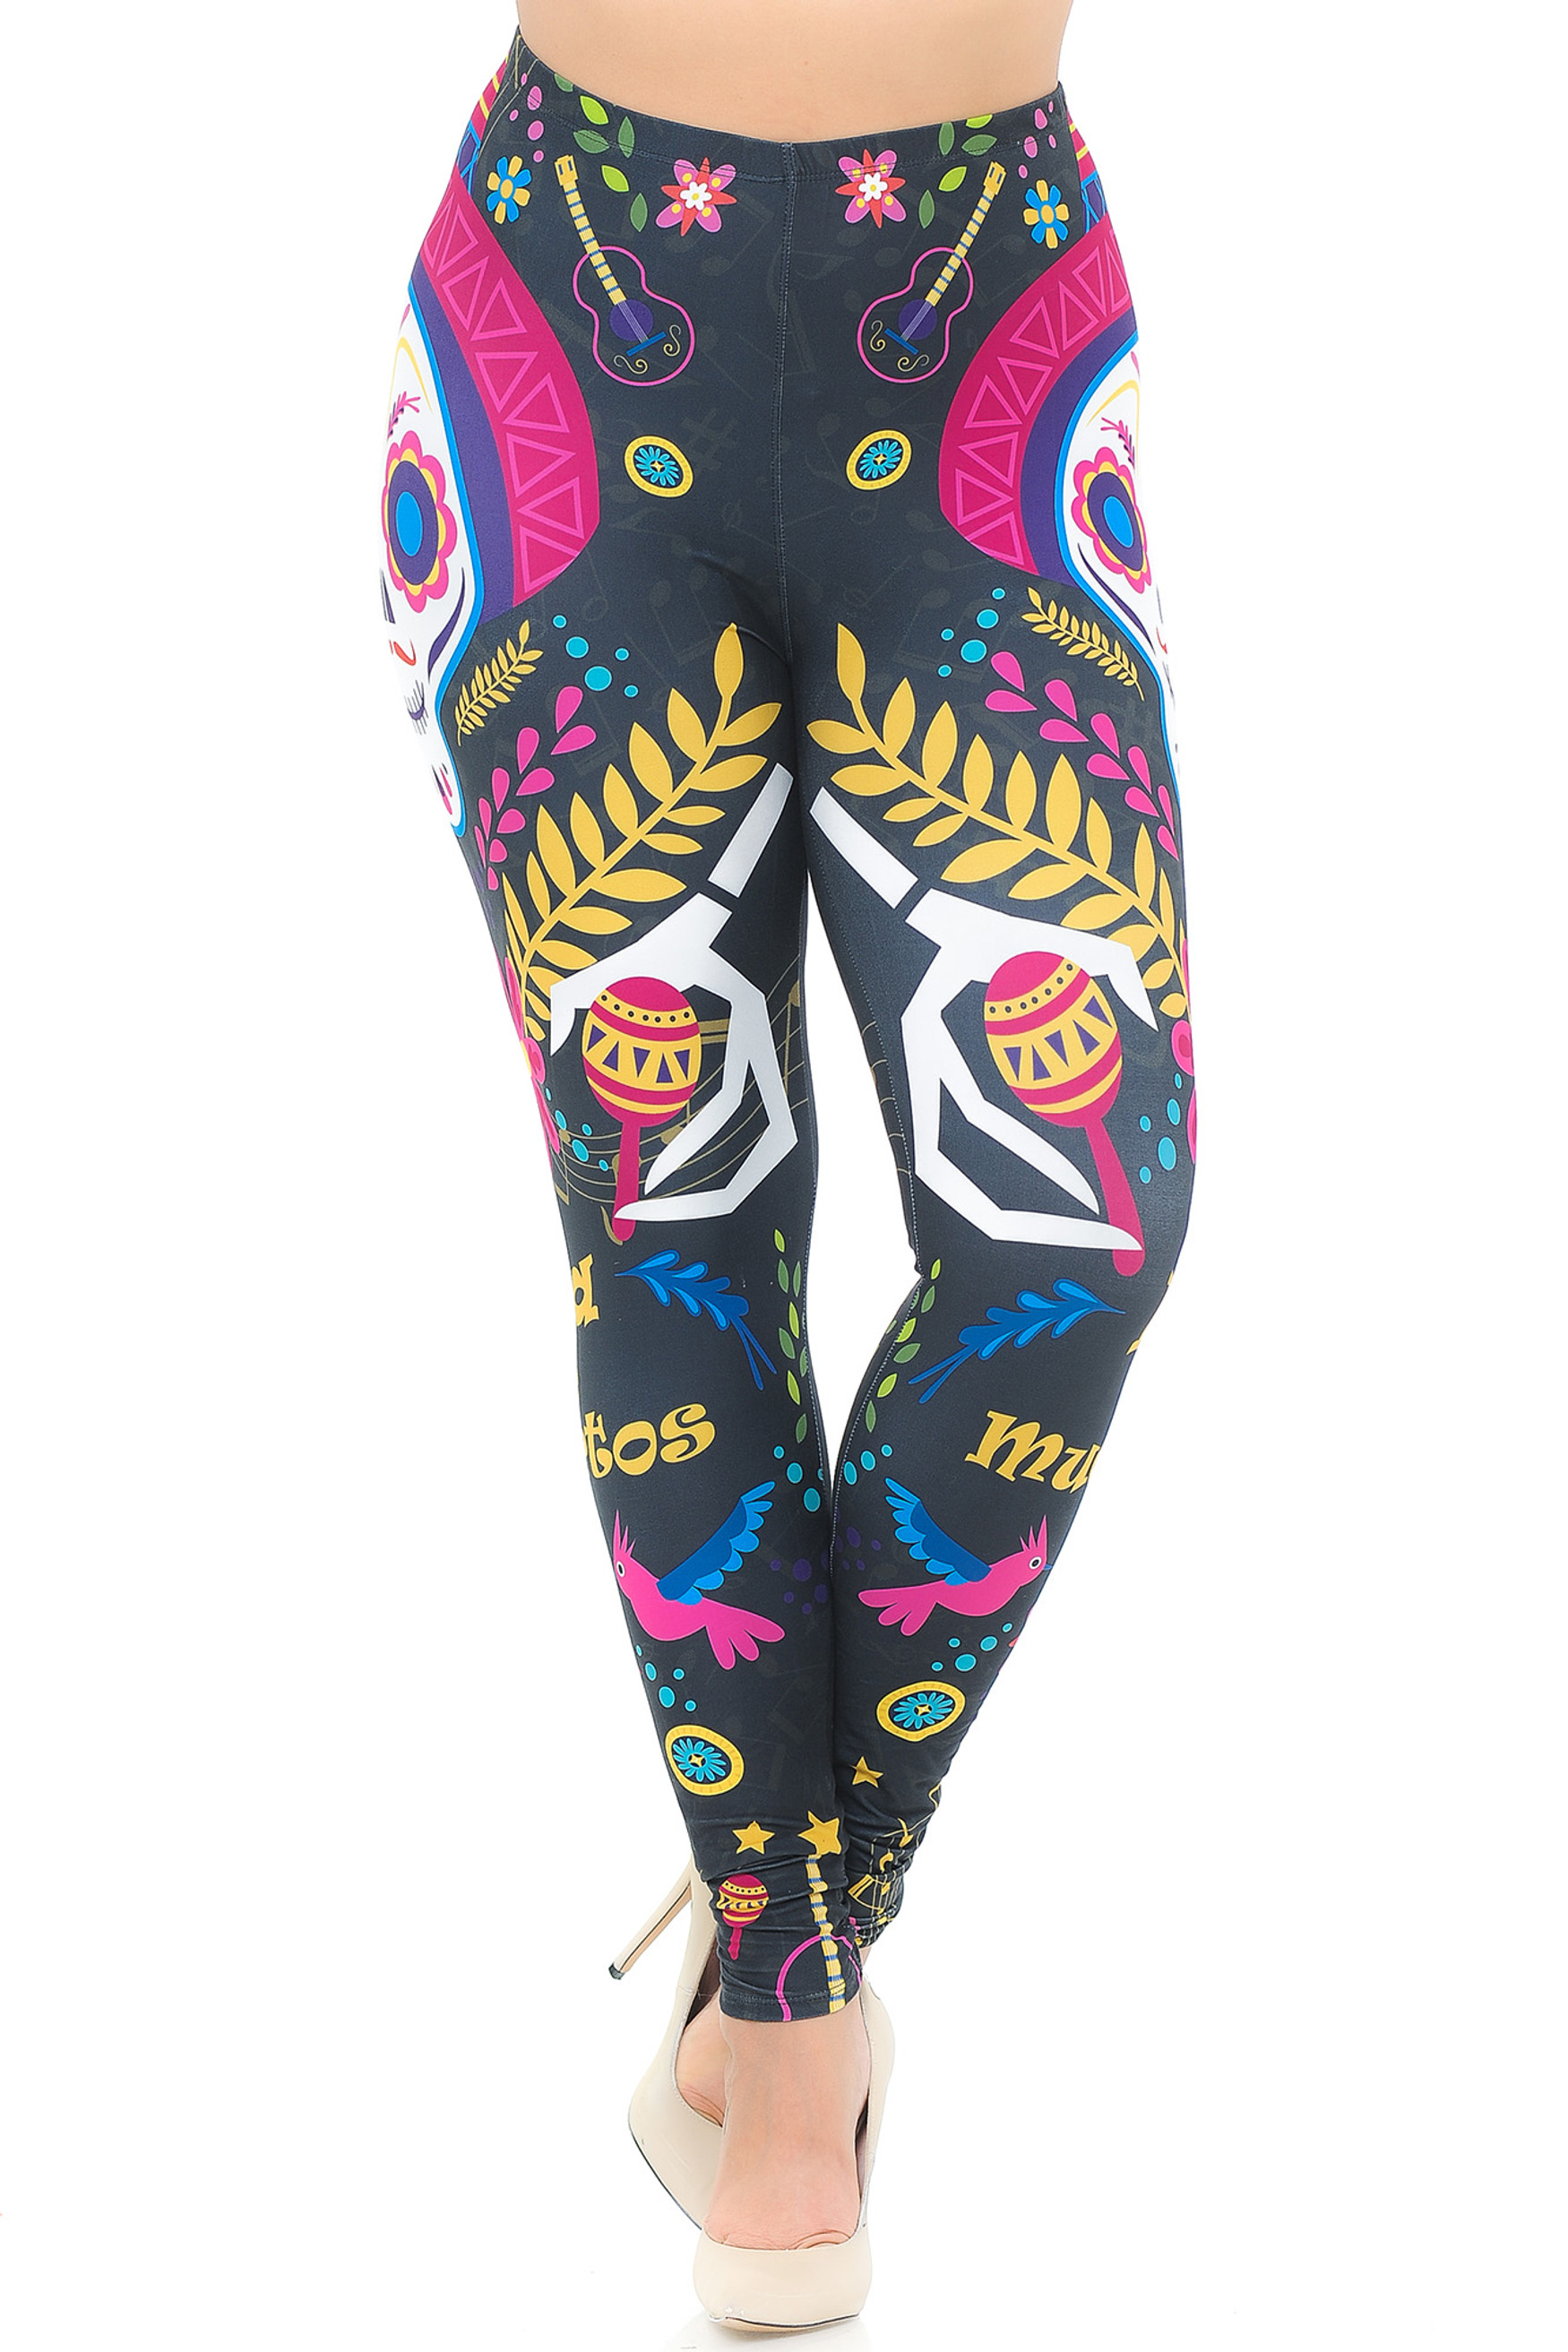 Creamy Soft Day of the Dead Extra Plus Size Leggings - 3X-5X - USA Fashion™